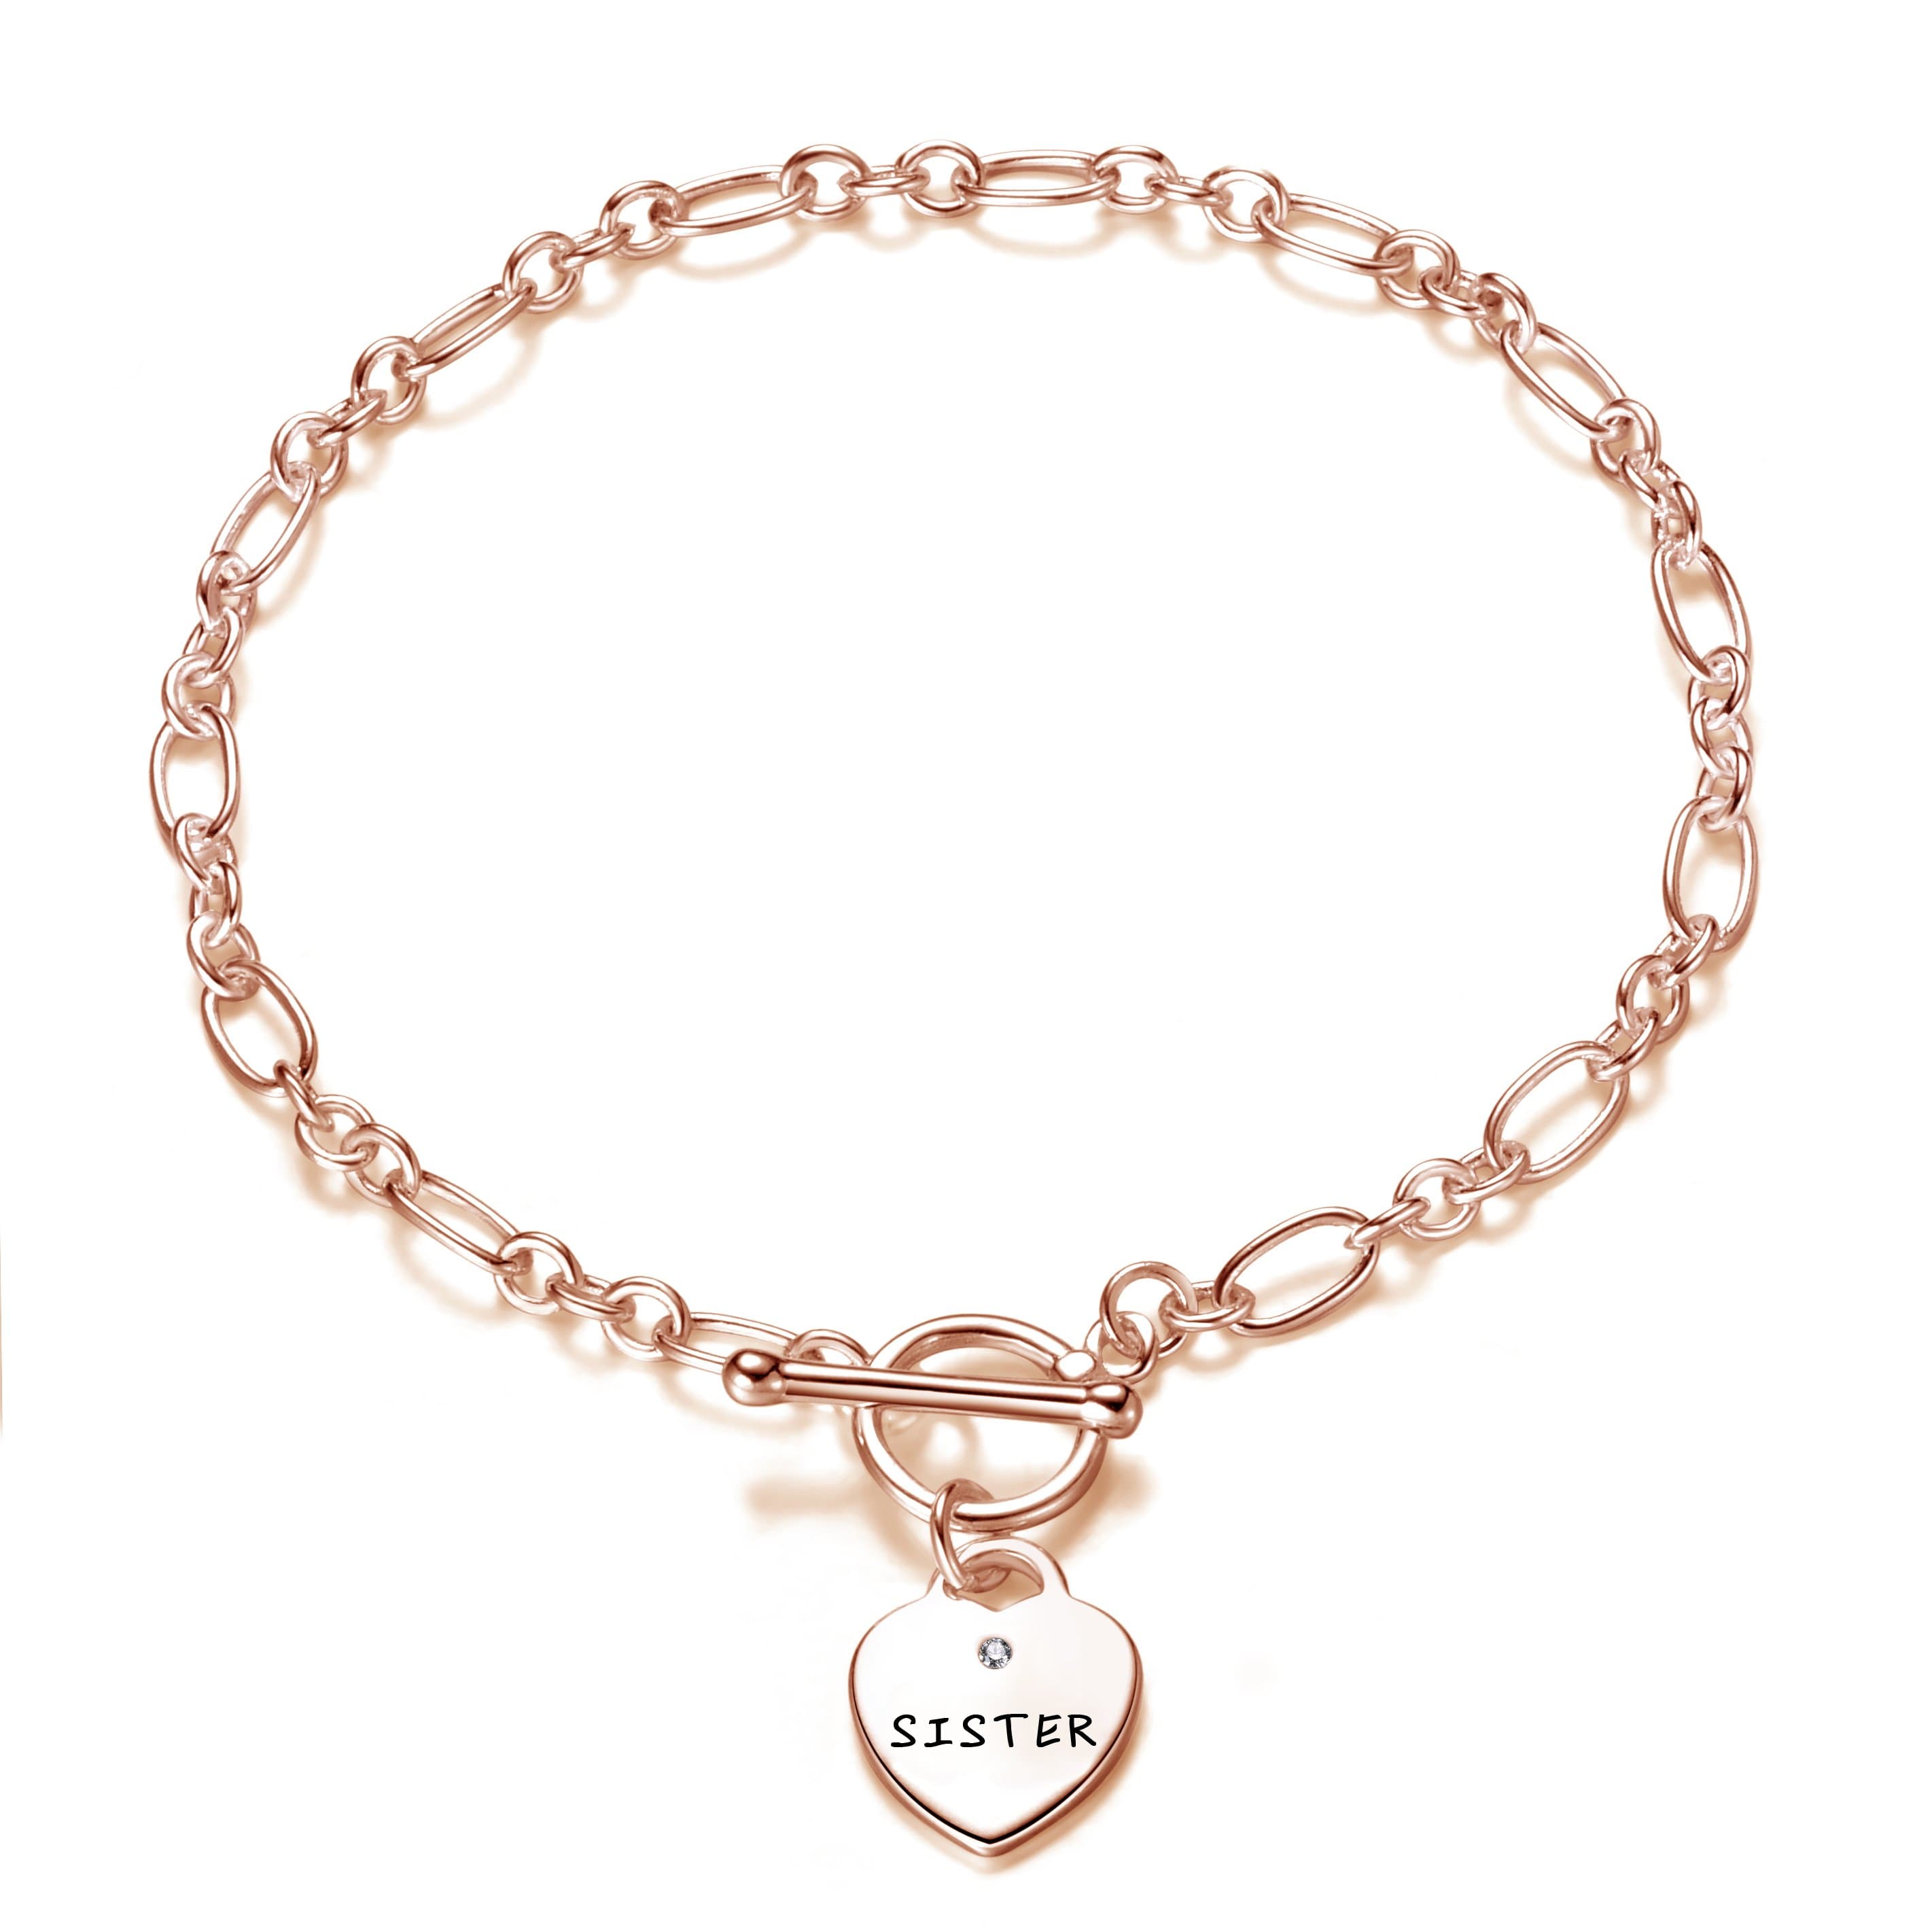 Rose Gold Plated Sister Charm Bracelet Created with Zircondia® Crystals by Philip Jones Jewellery